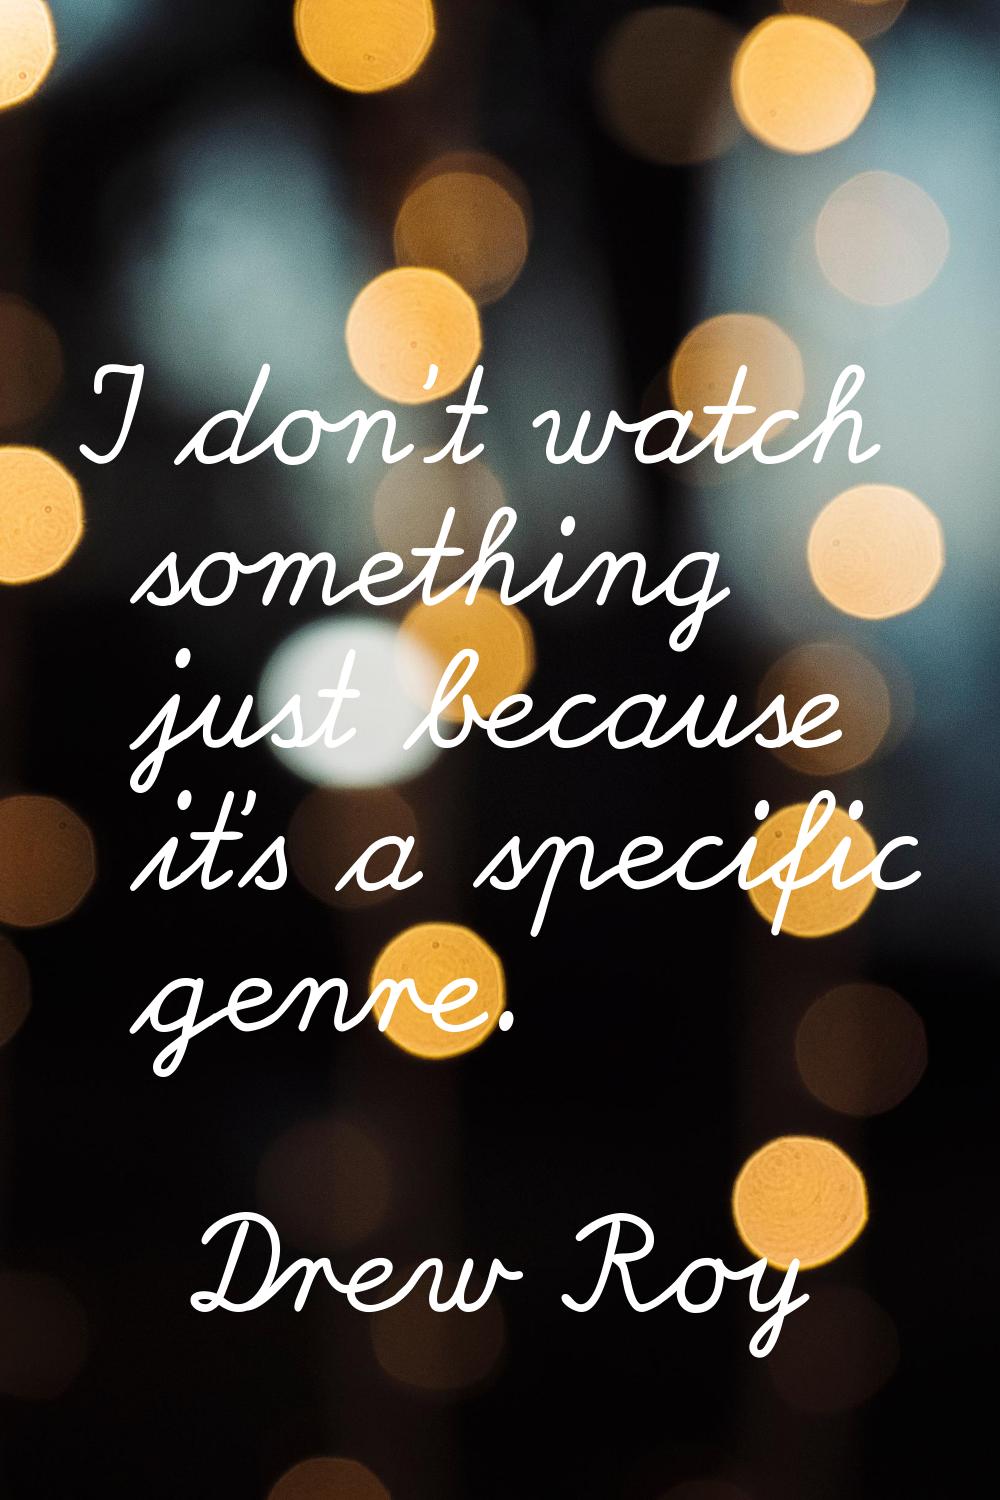 I don't watch something just because it's a specific genre.